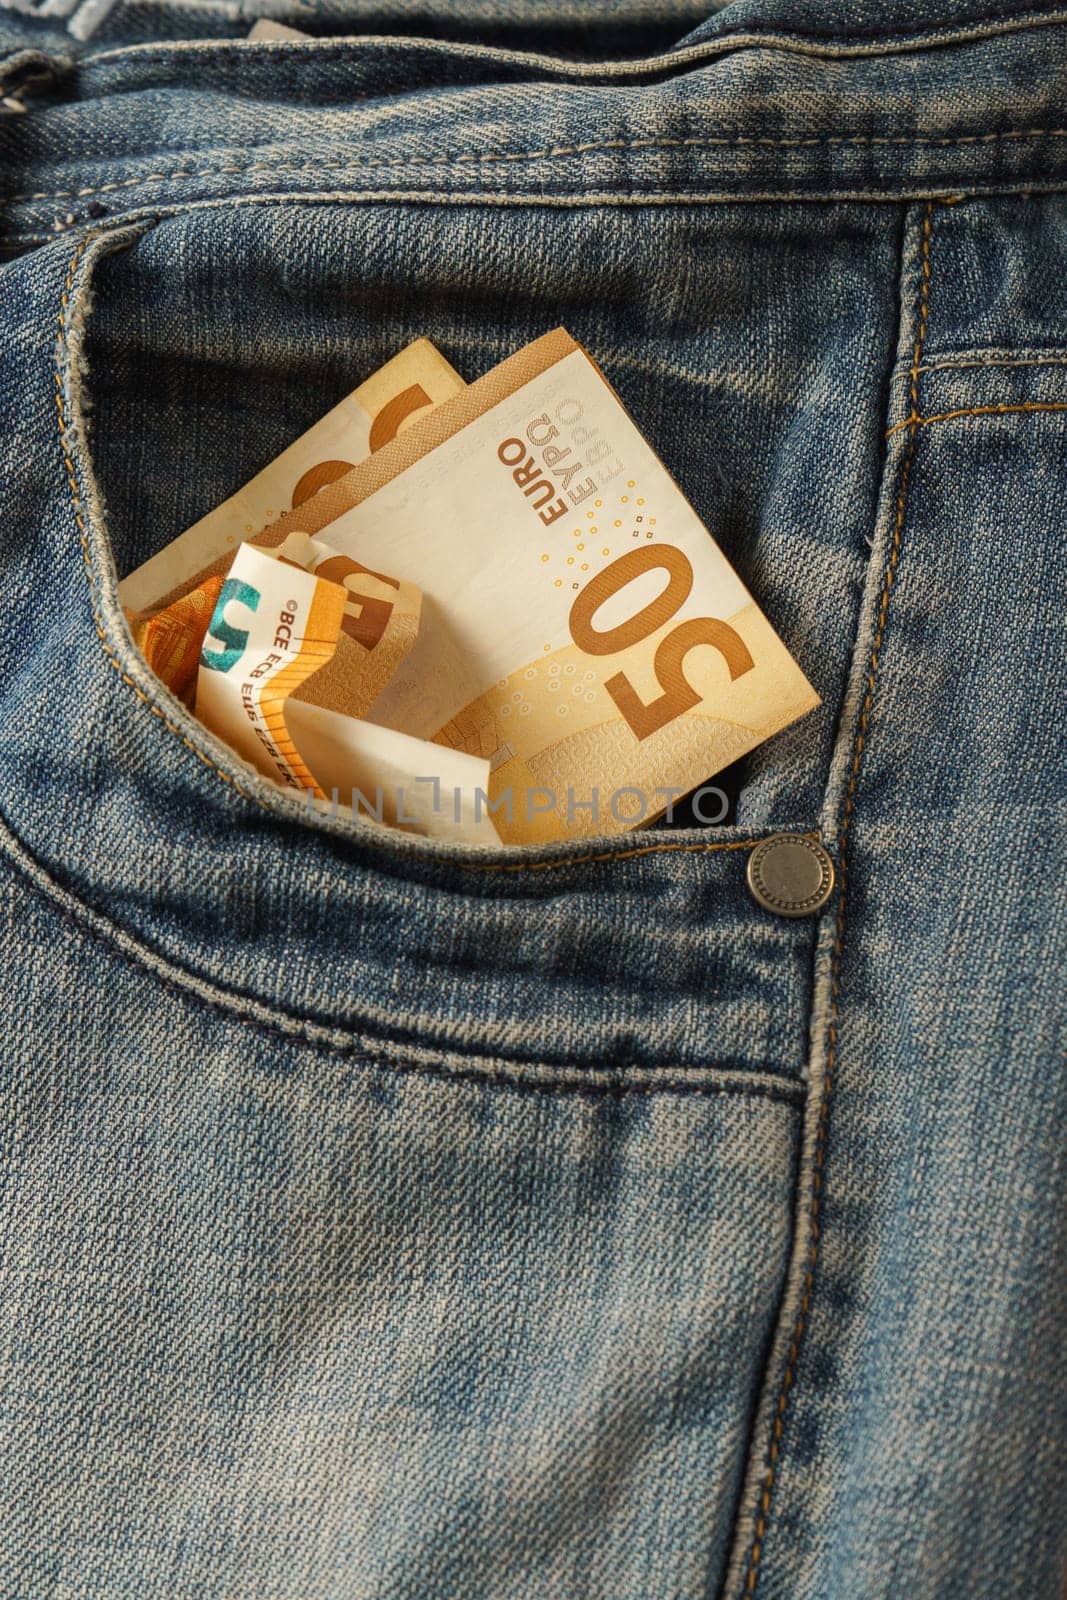 jeans with euro banknotes coming out of the pocket by joseantona